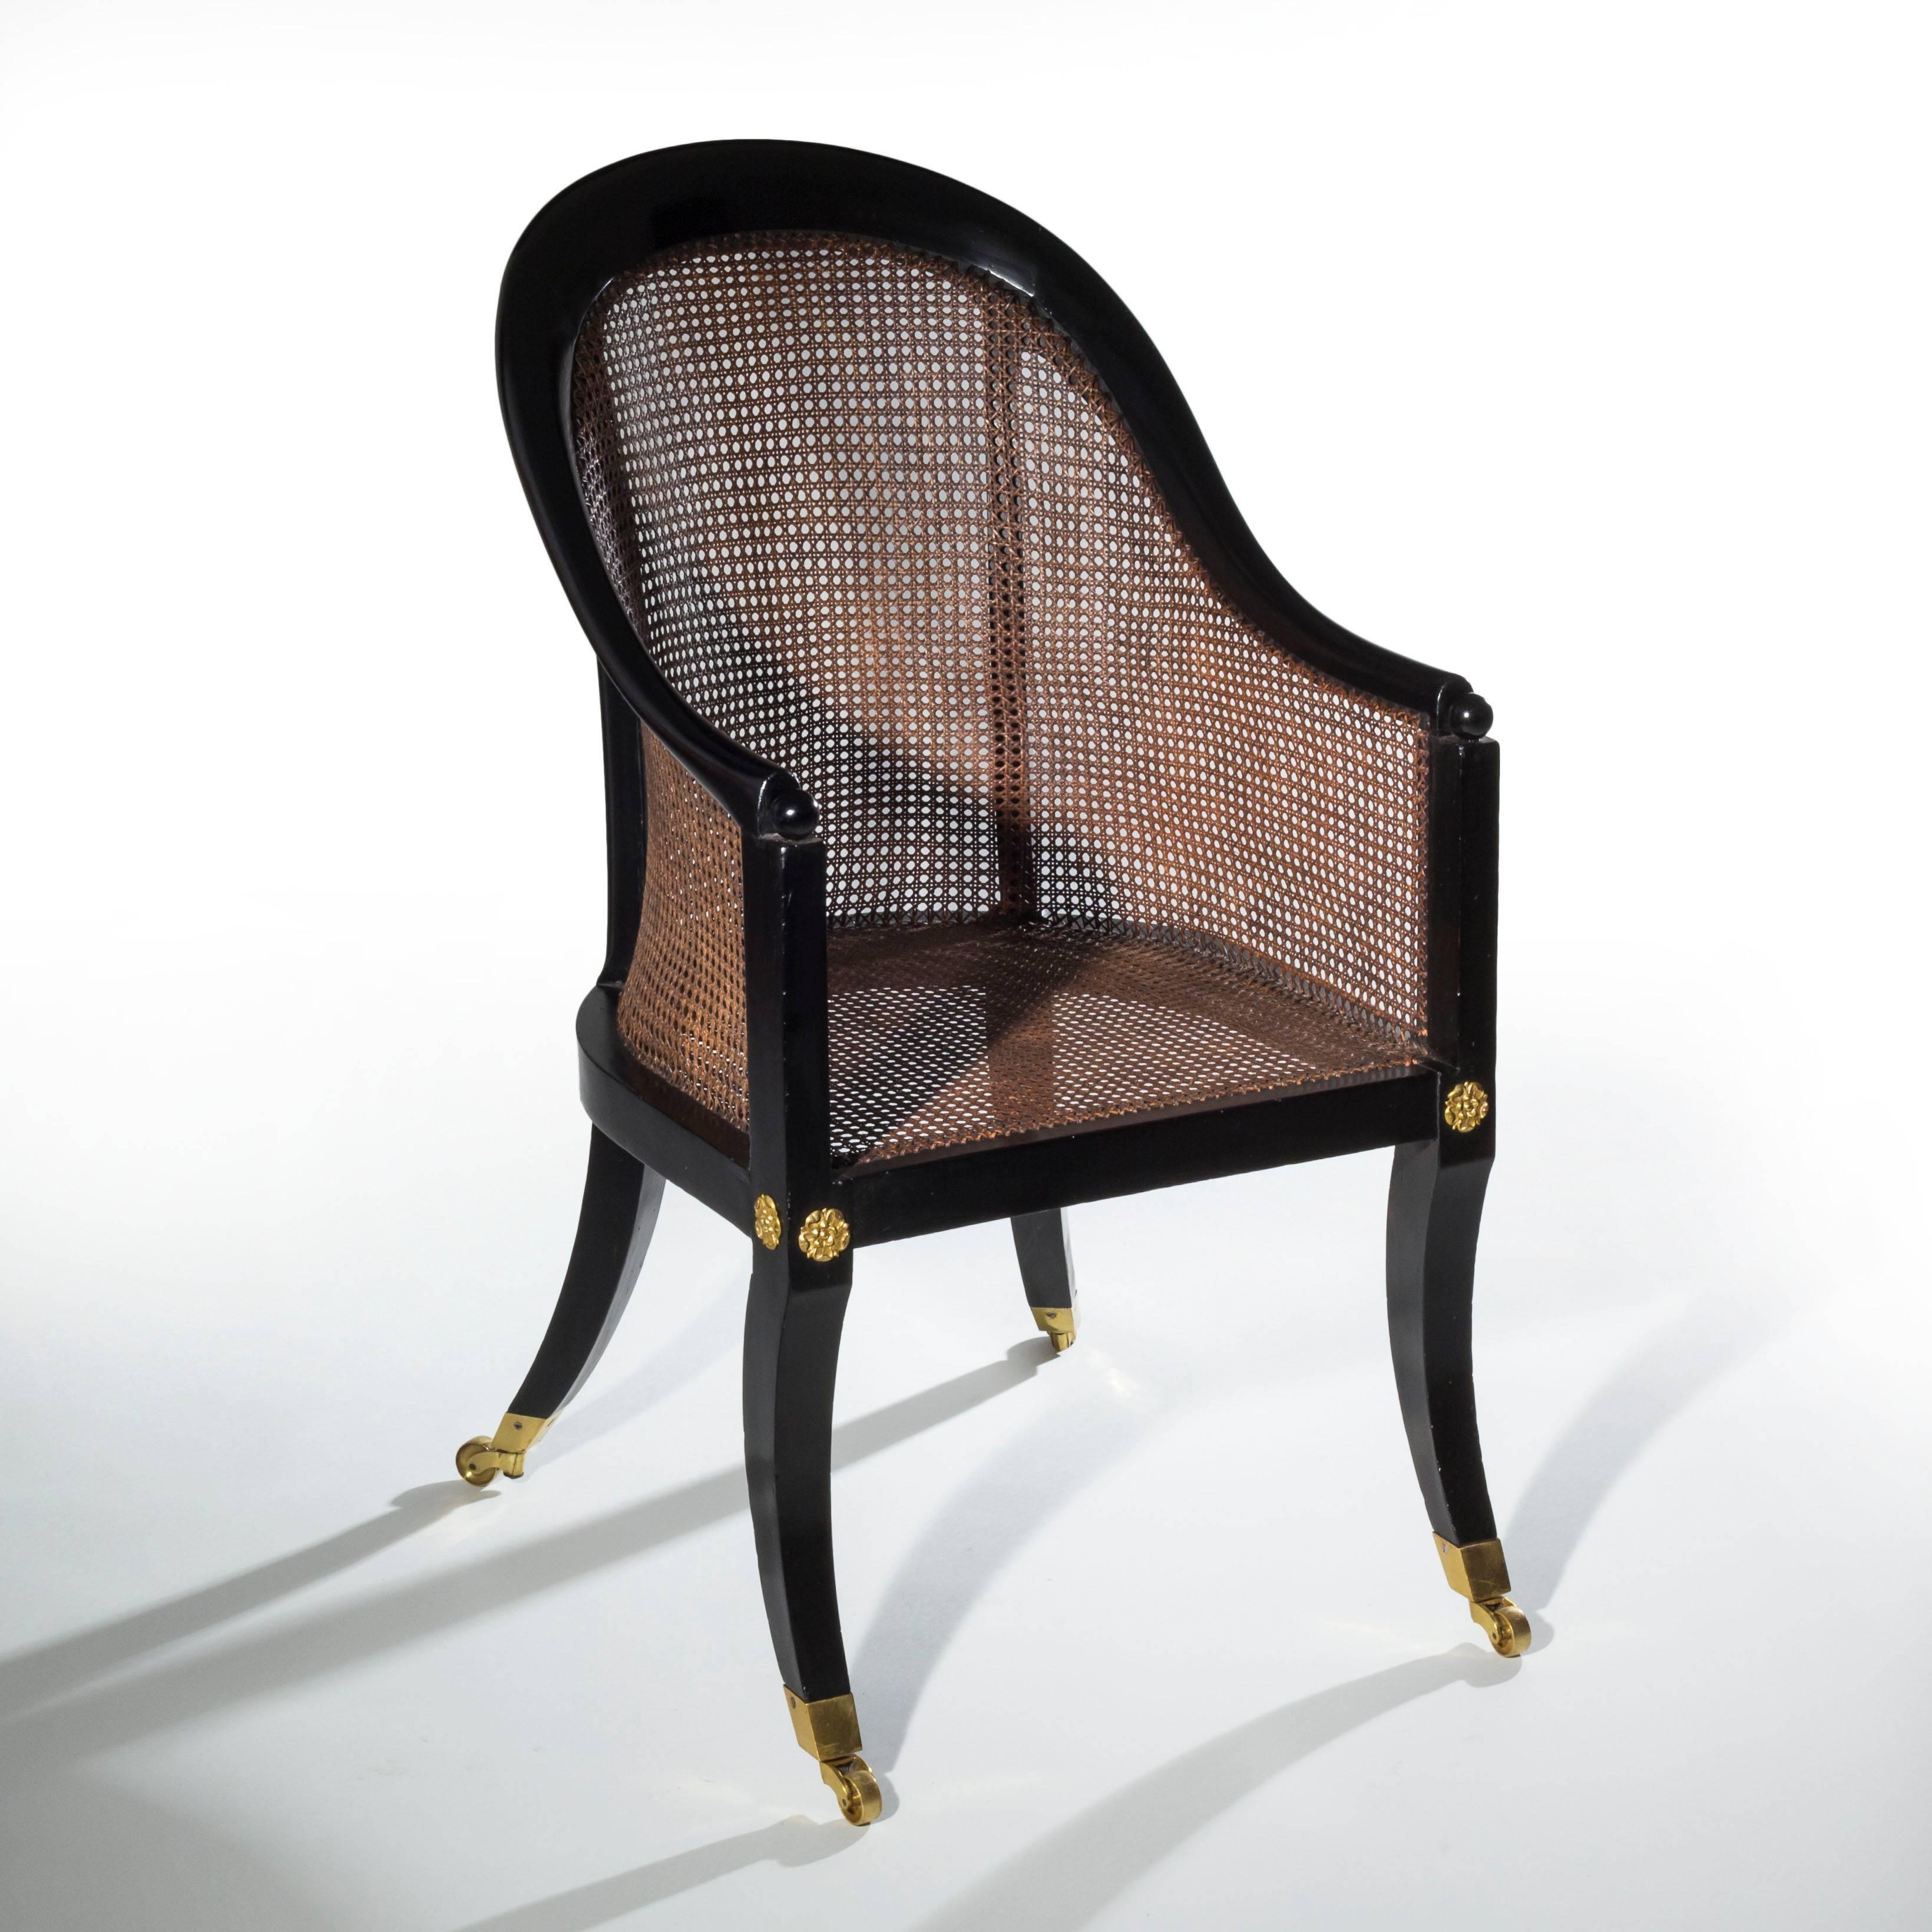 Early 19th century Regency period black lacquered (ebonized) tub bergere armchair of Grecian 'Klismos' form, attributed to Gillows of Lancaster and London. English, circa 1810

Frame caned throughout, with arched top-rail and down swept arms